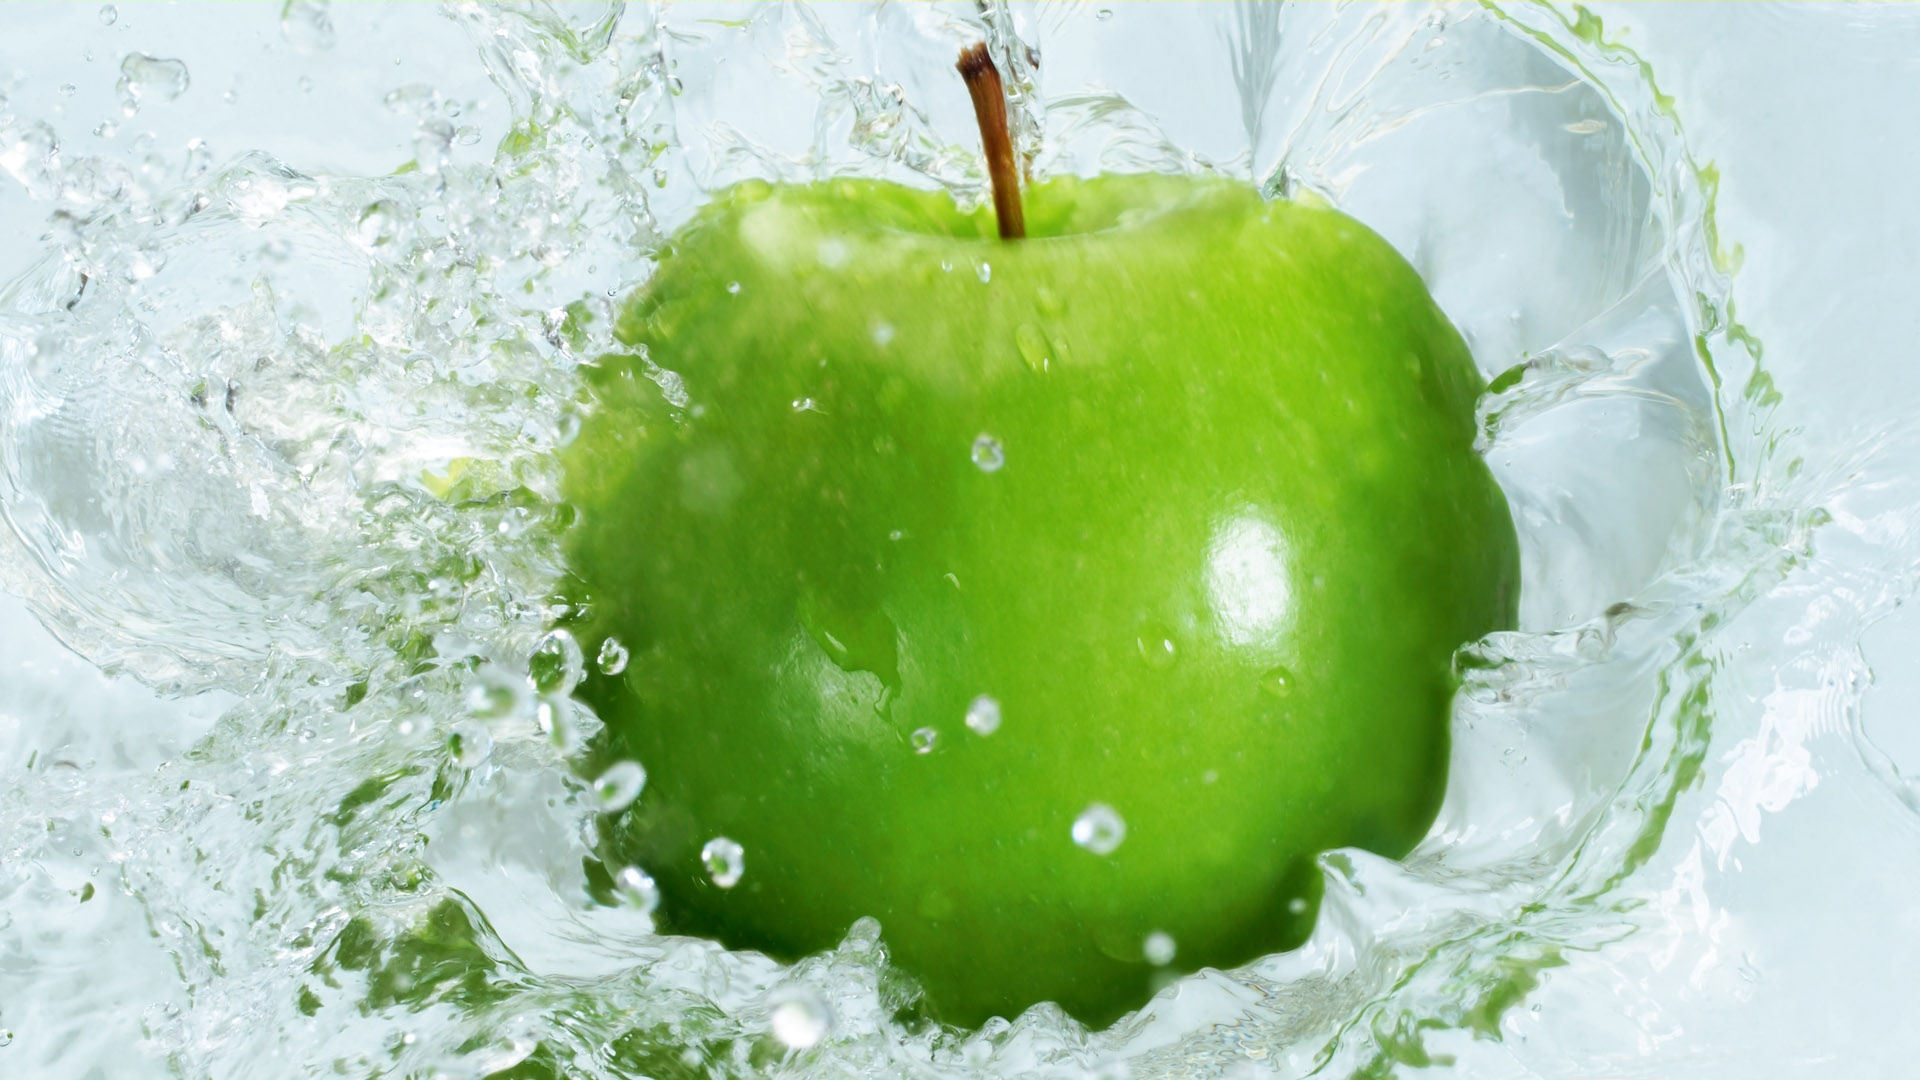 Rate Select Rating Give Green Apple Splash